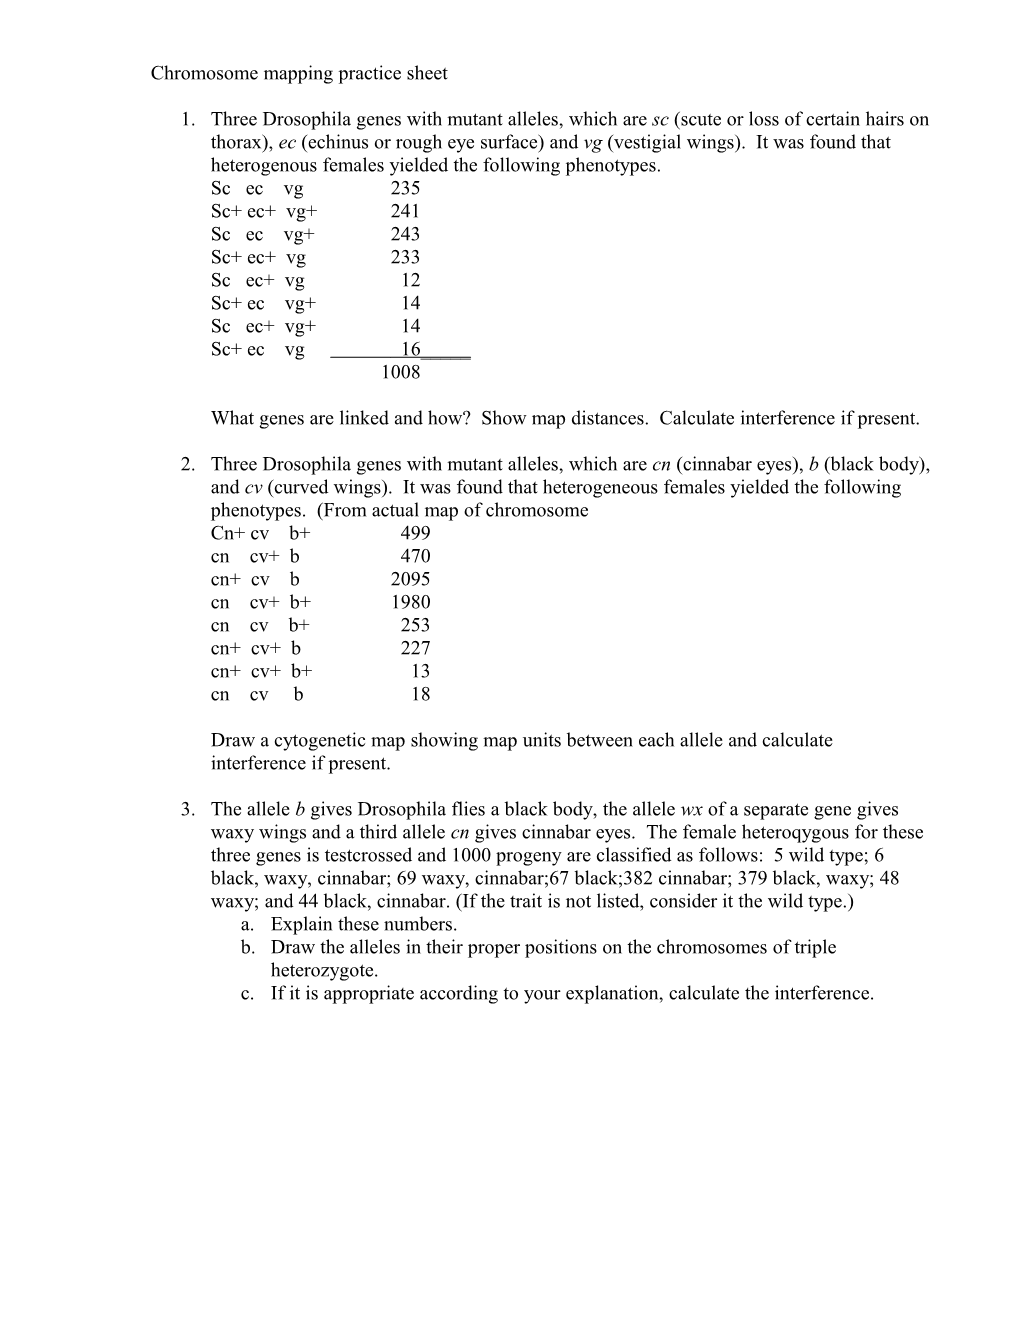 Chromosome Mapping Practice Sheet